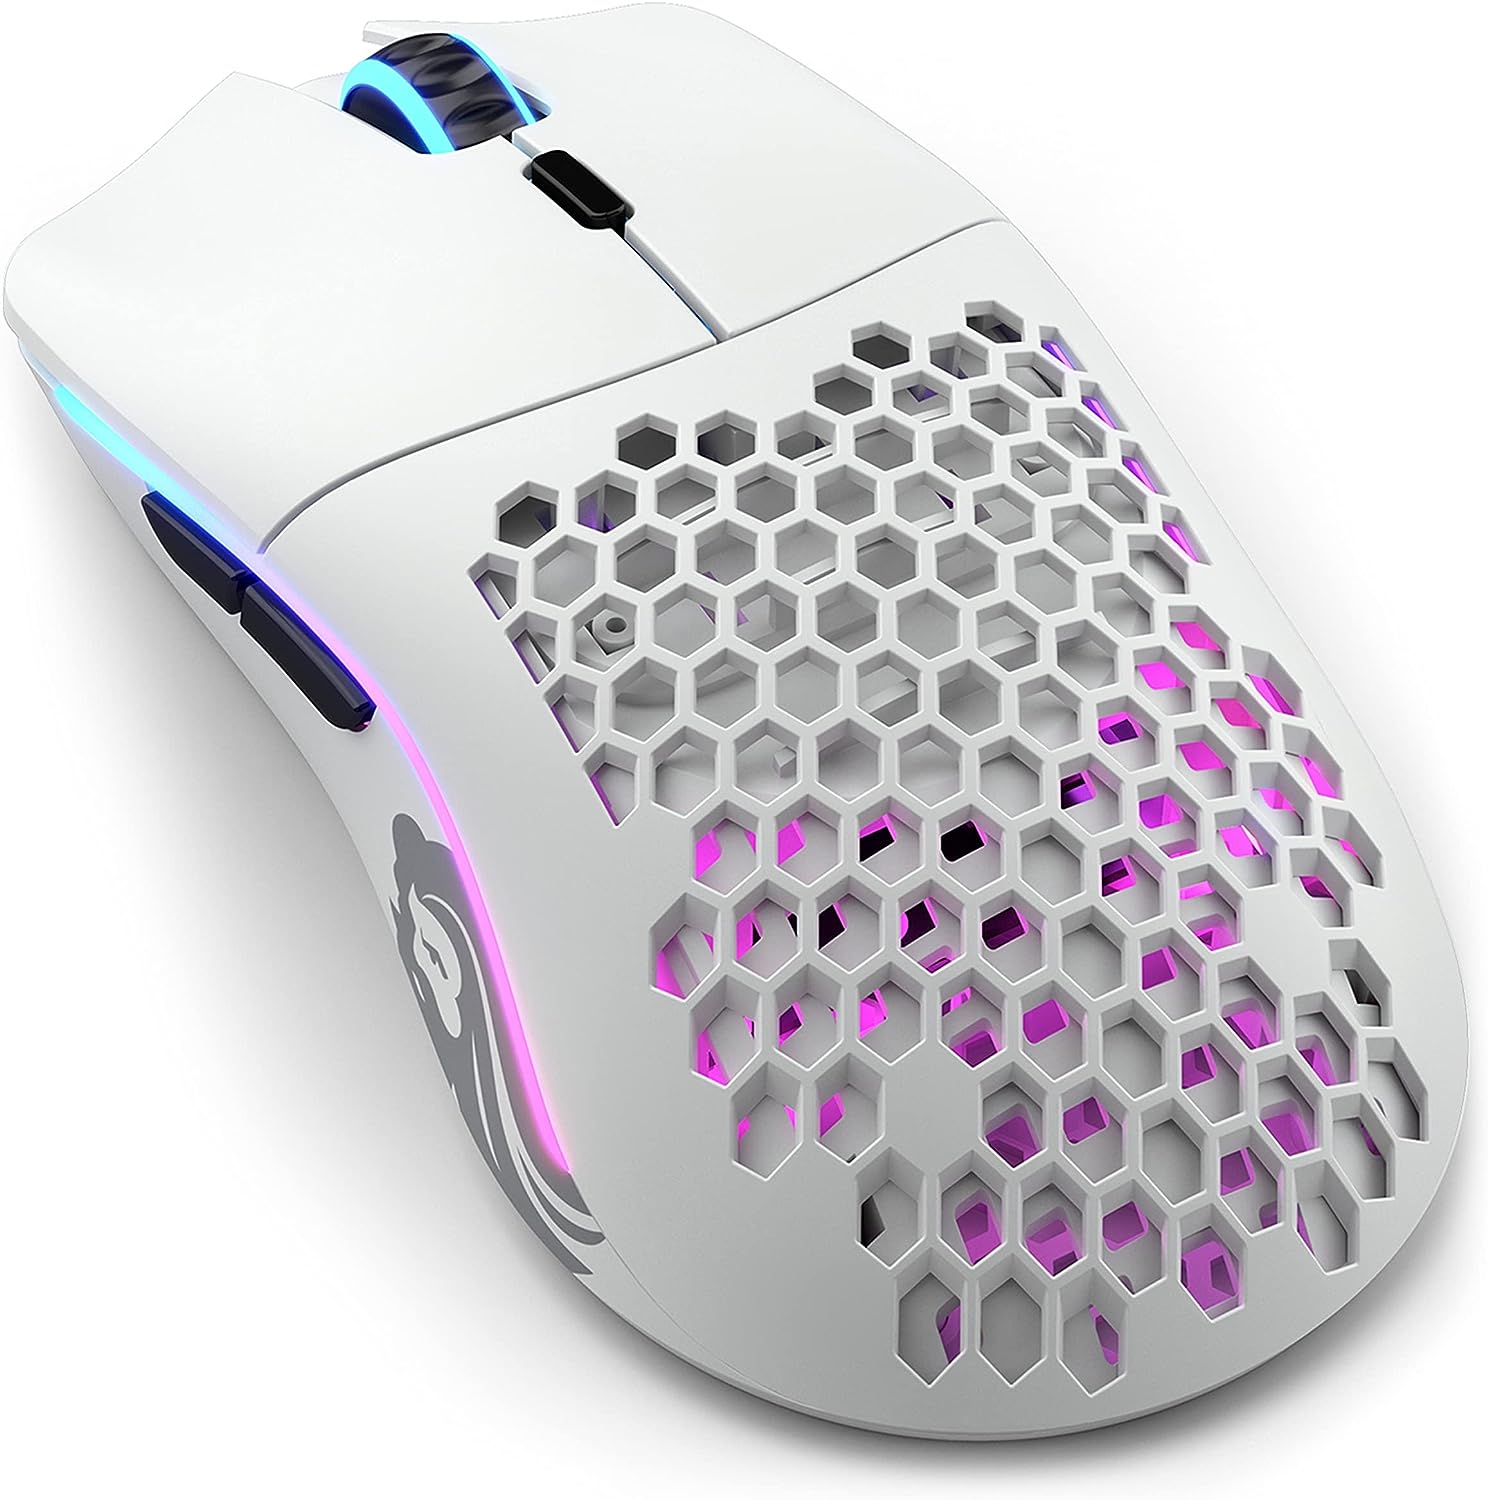 Find the Best Gaming Mouse: Our Top 5 Picks to Level Up Your Gaming Setup